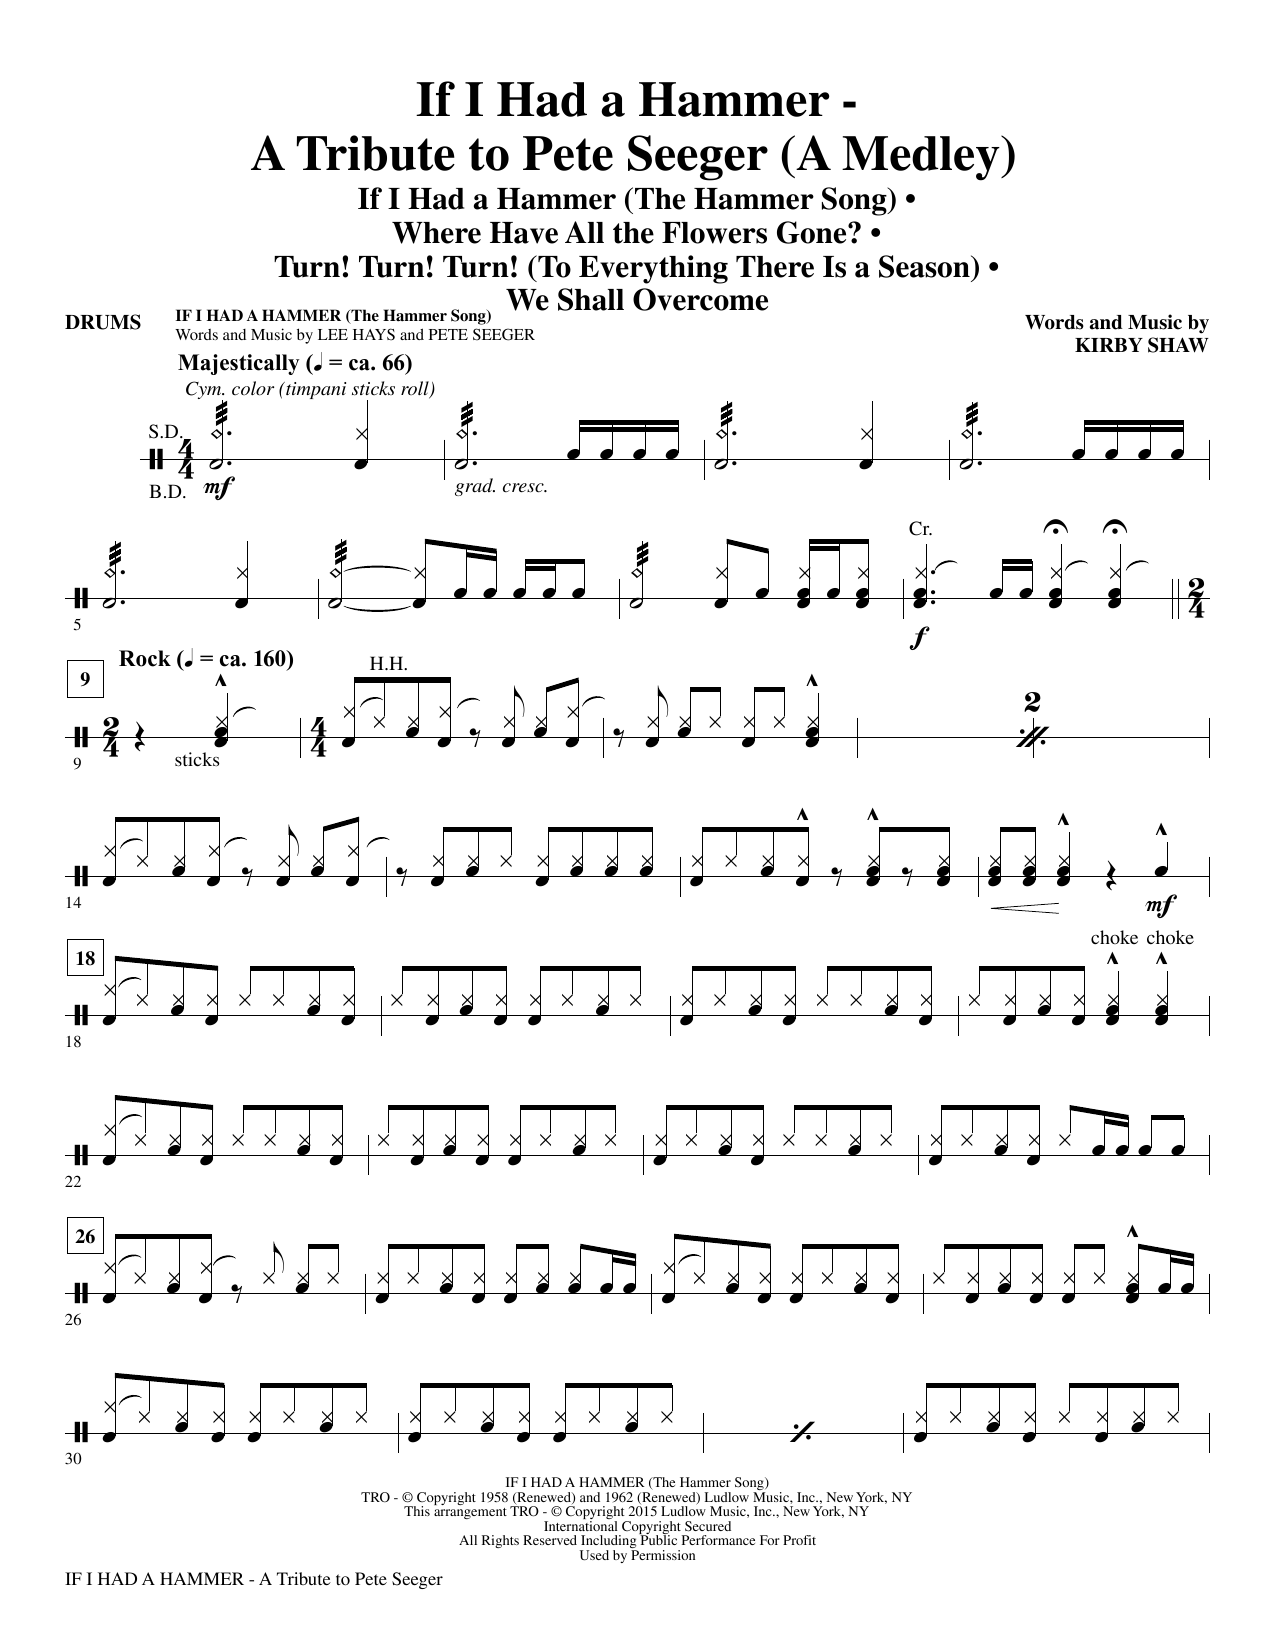 Kirby Shaw If I Had A Hammer - A Tribute to Pete Seeger - Drums sheet music notes and chords. Download Printable PDF.